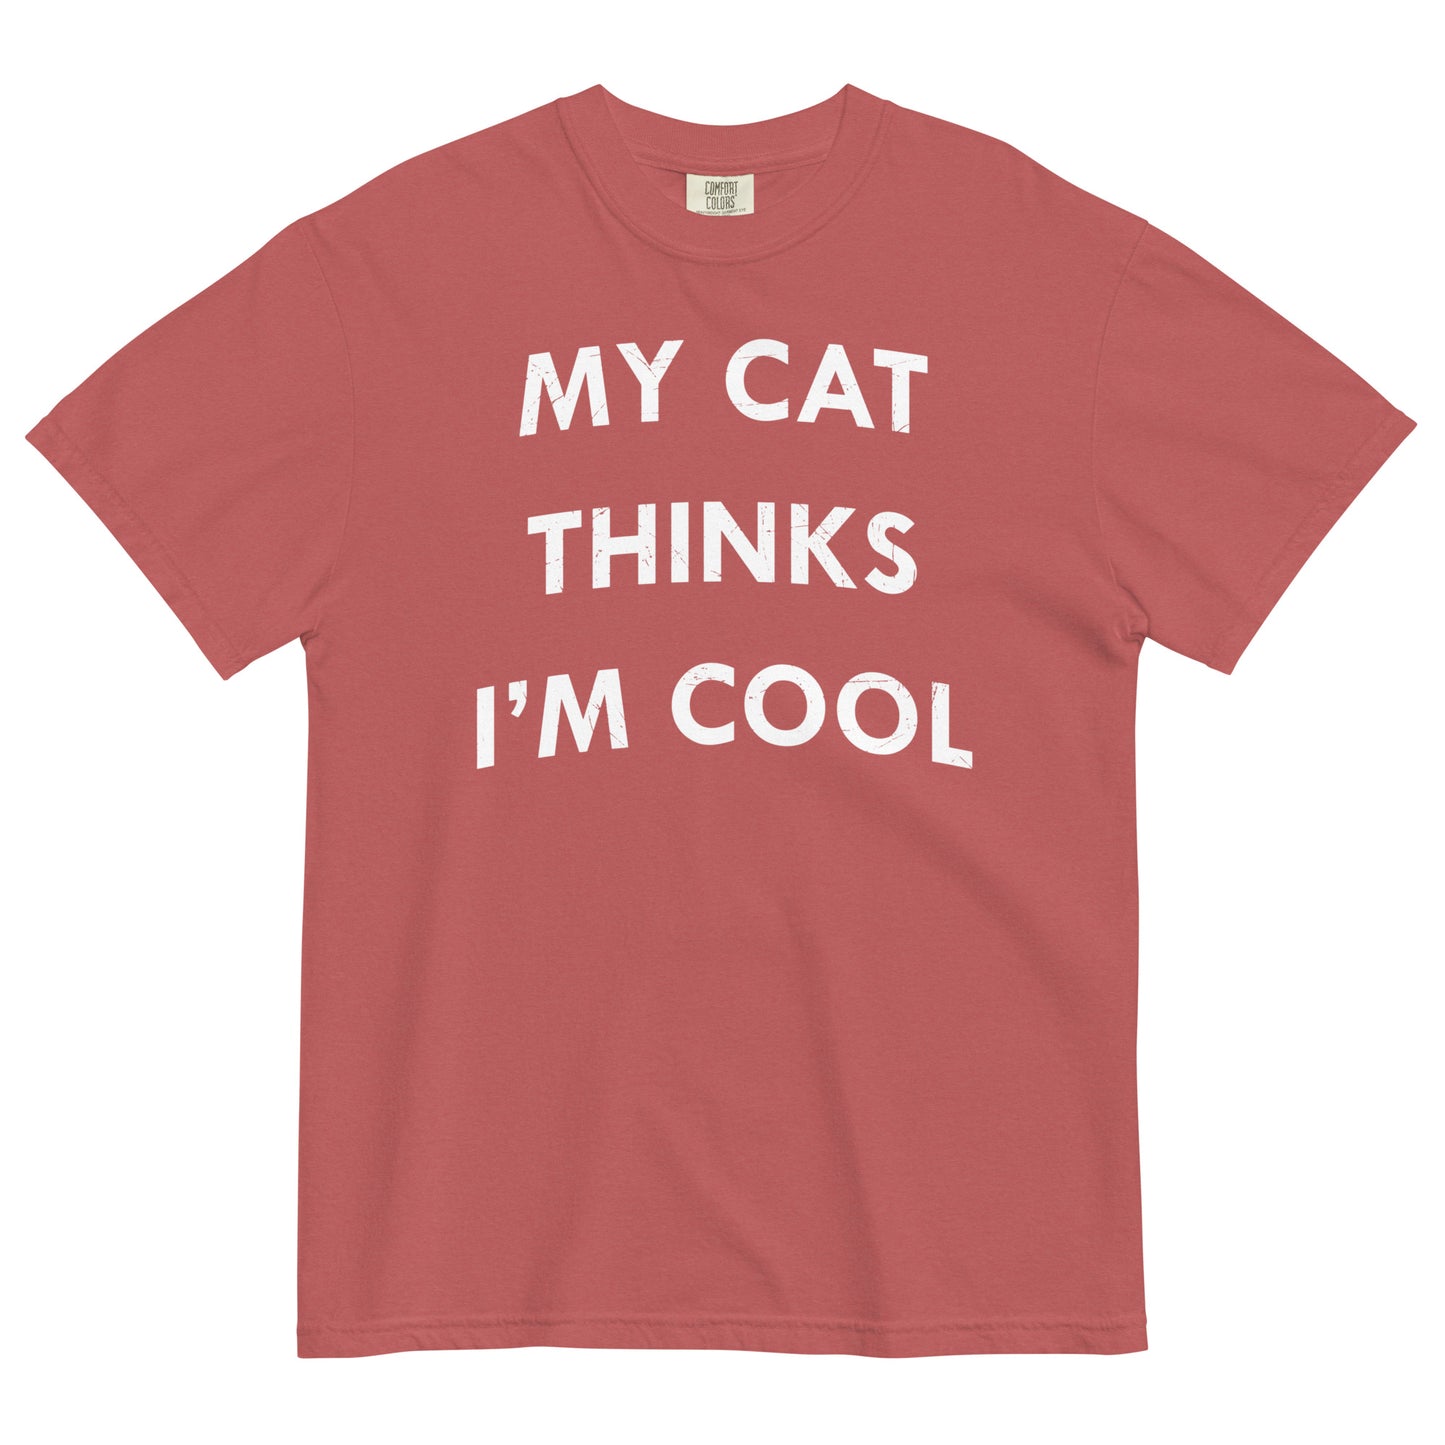 My Cat Thinks I'm Cool Men's Relaxed Fit Tee